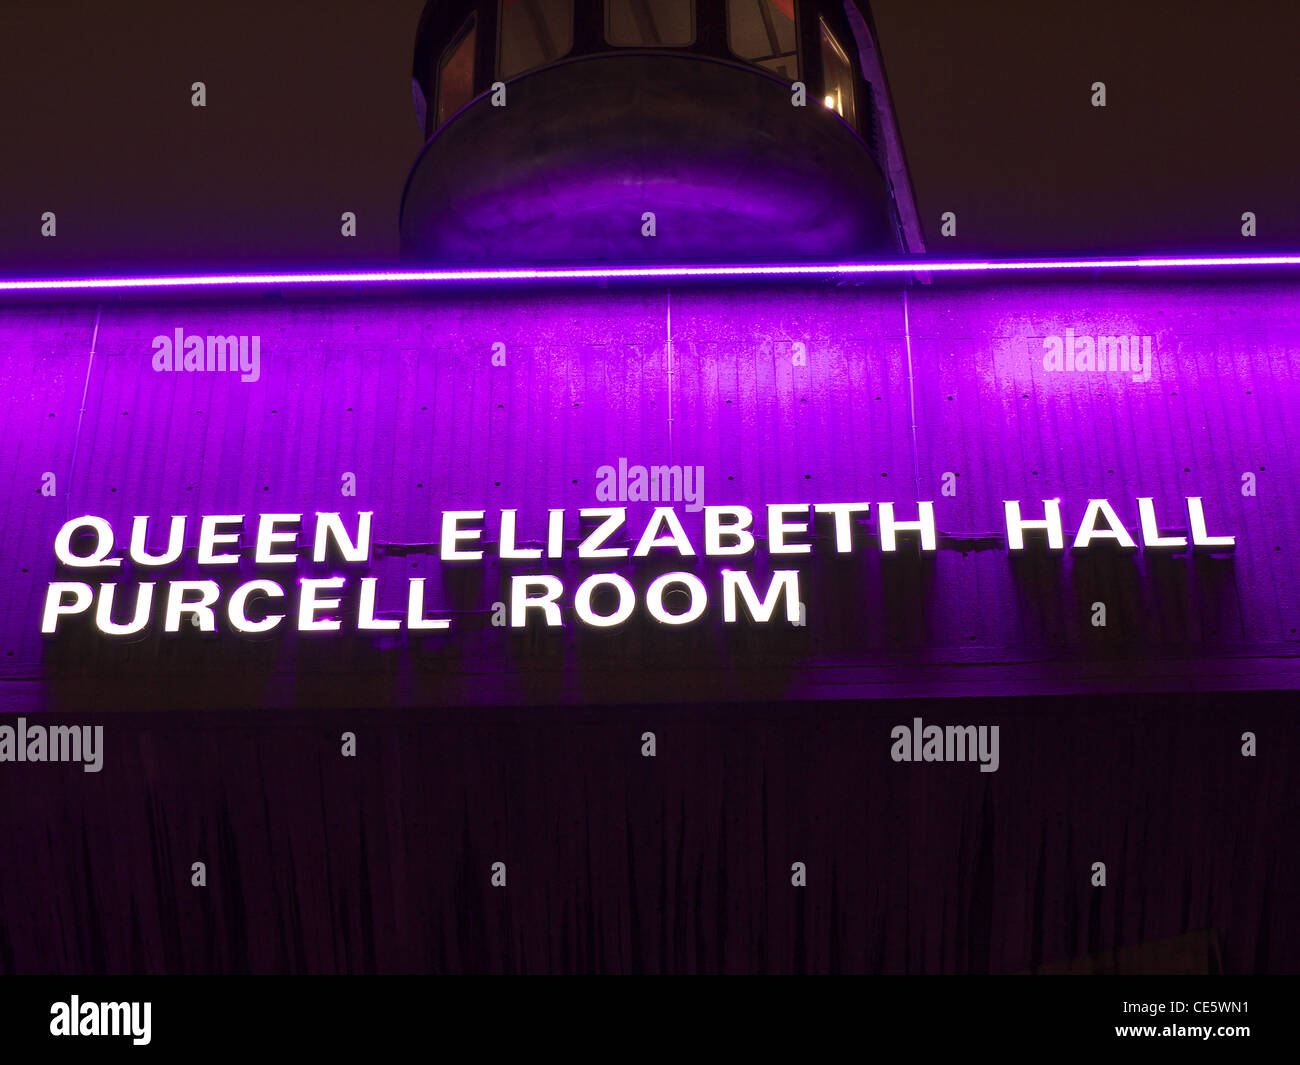 View of a sign outside the Queen Elizabeth Hall Purcell Room in London at night Stock Photo